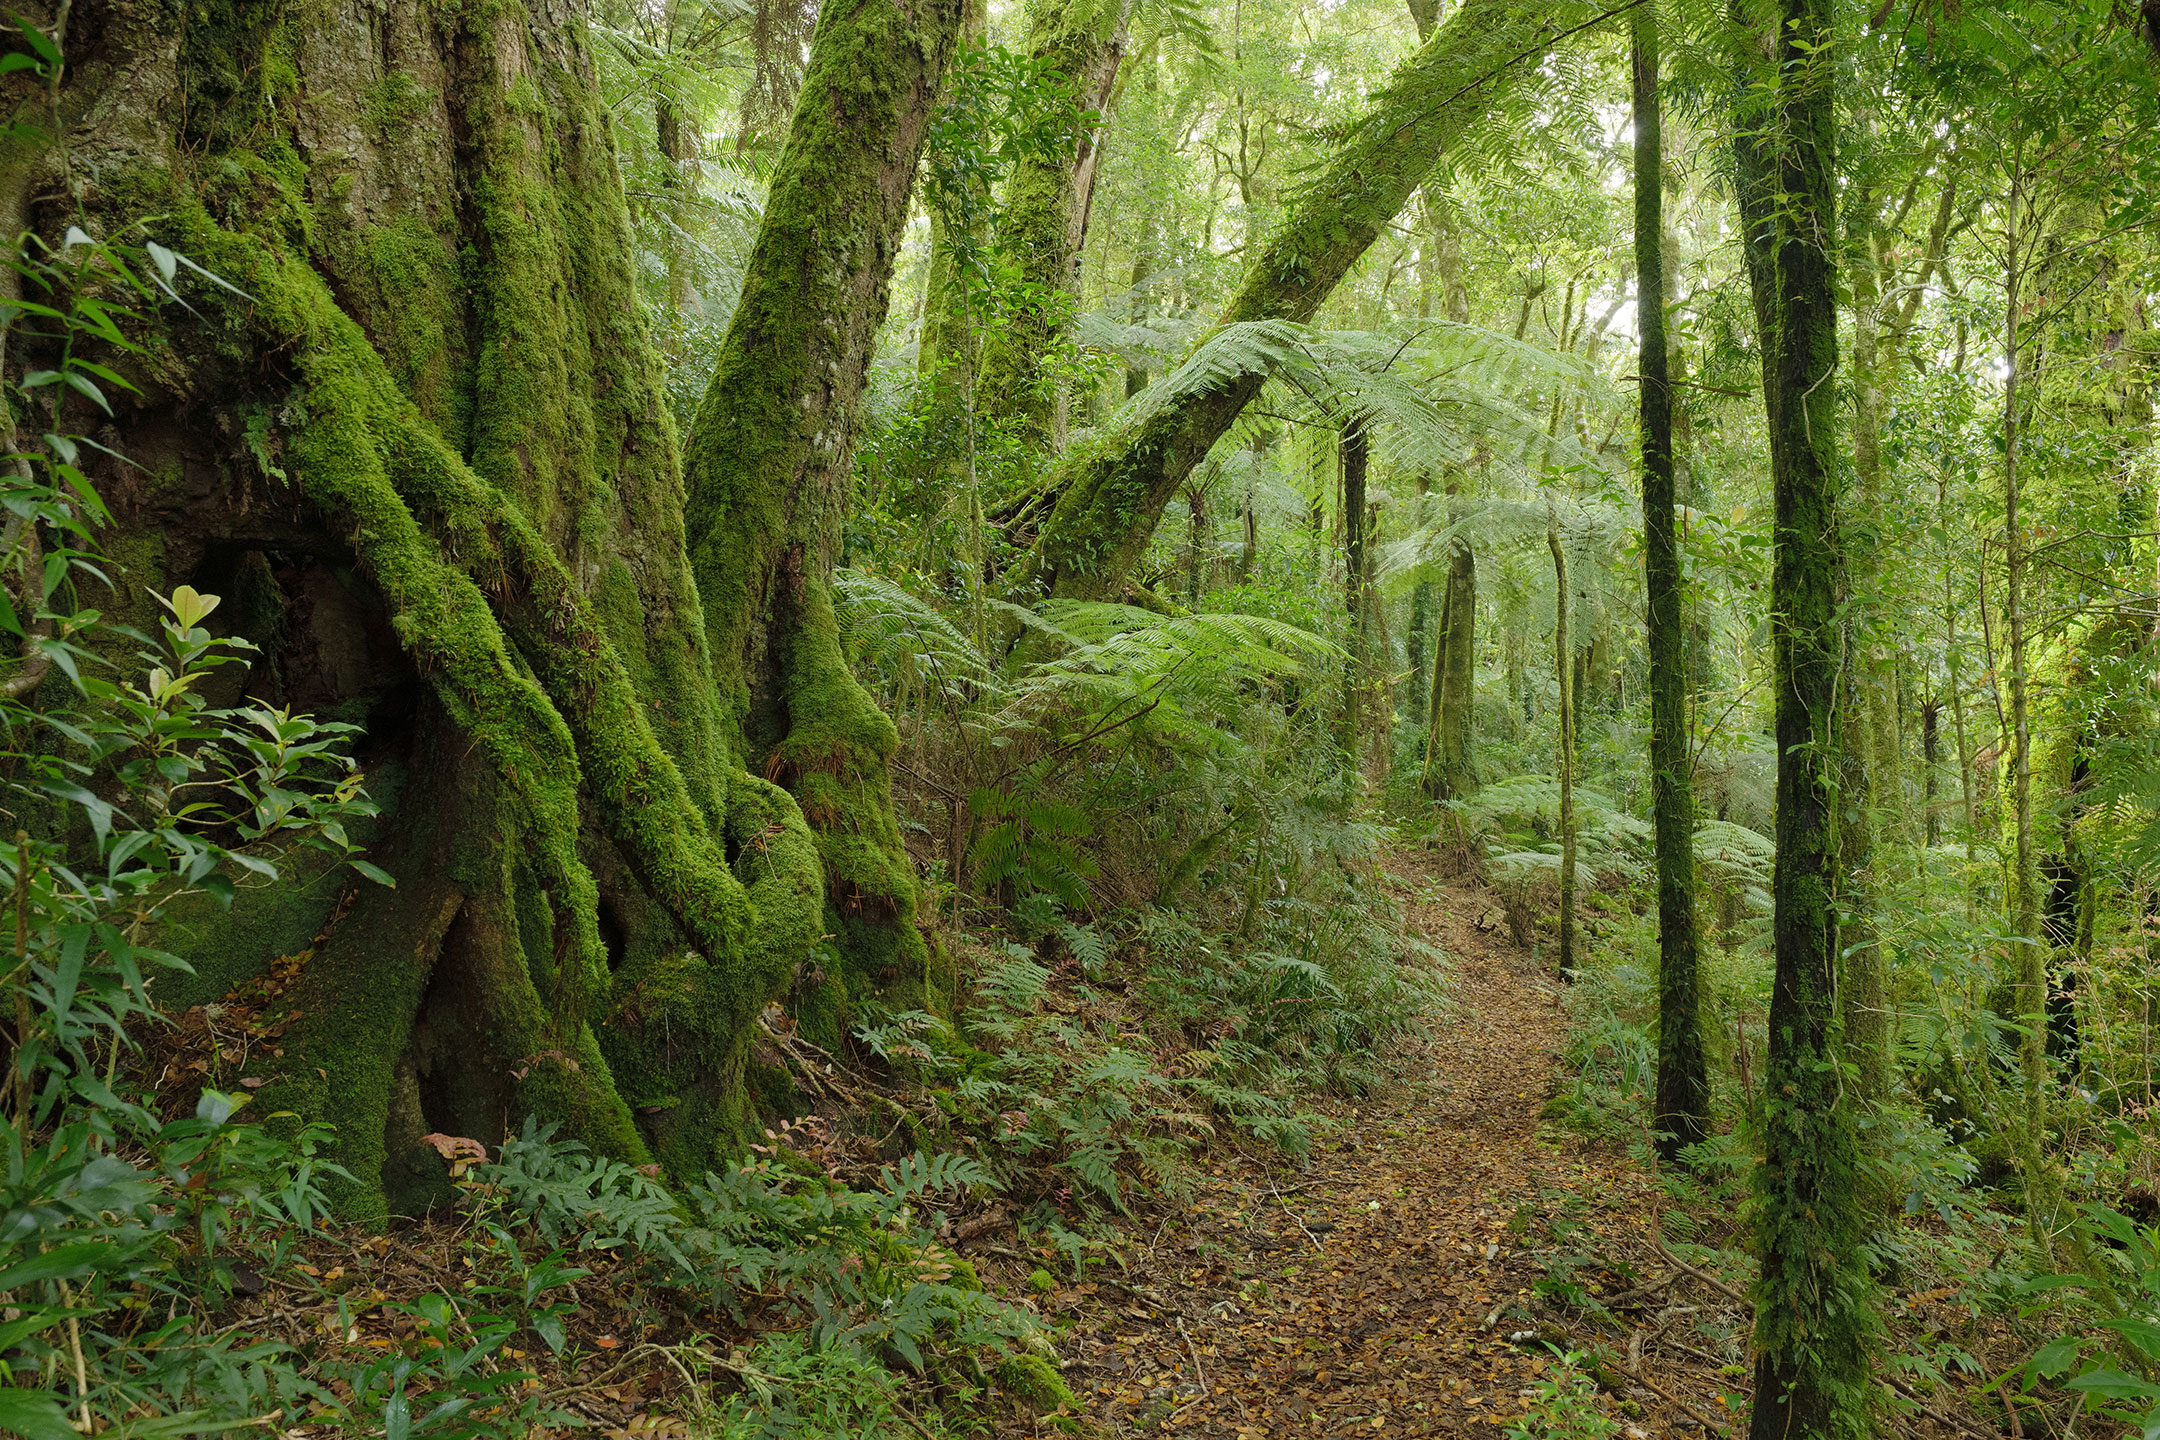 A magnificent Antarctic Beech tree arches over a path in the lush rainforest of Lamington National Park, Australia 